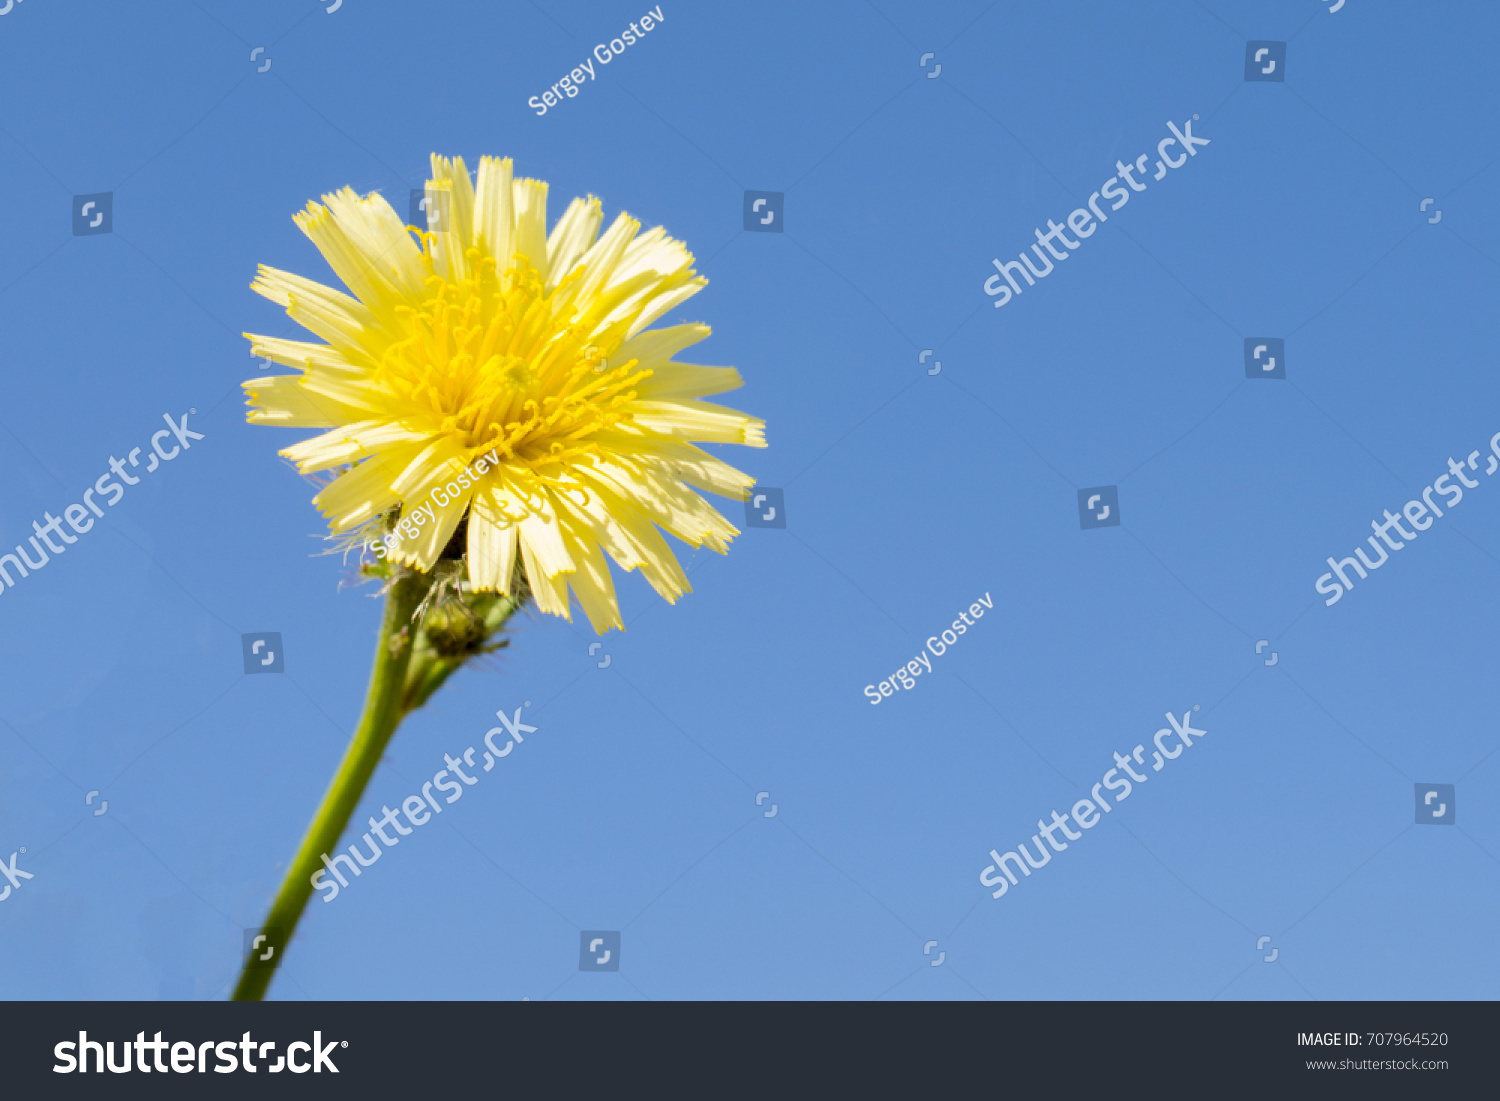 stock-photo-yellow-flower-against-the-cloudless-sky-707964520.jpg